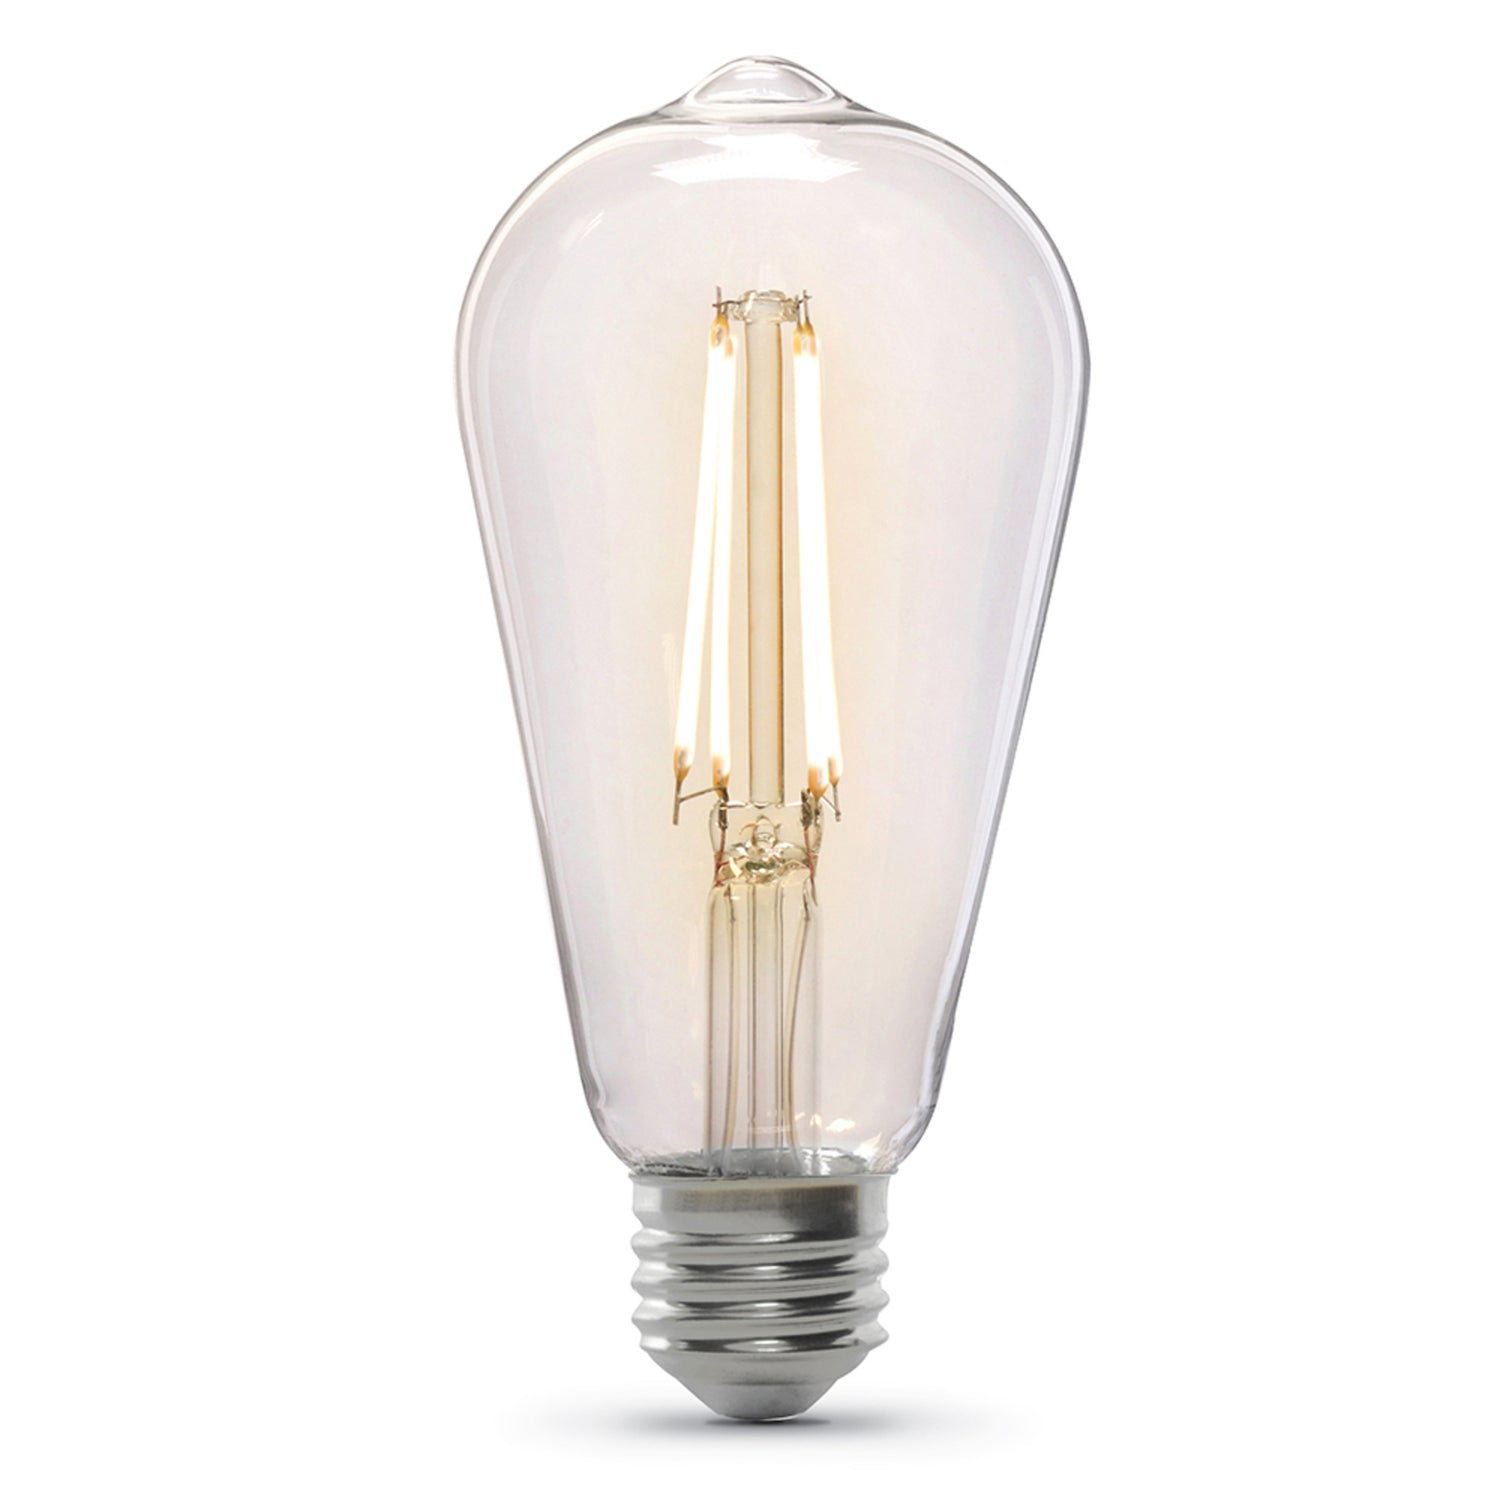 5.5W (25W Replacement) ST19 E26 Dimmable Straight Filament Clear Glass Vintage Edison LED Light Bulb, Soft White (2-Pack)